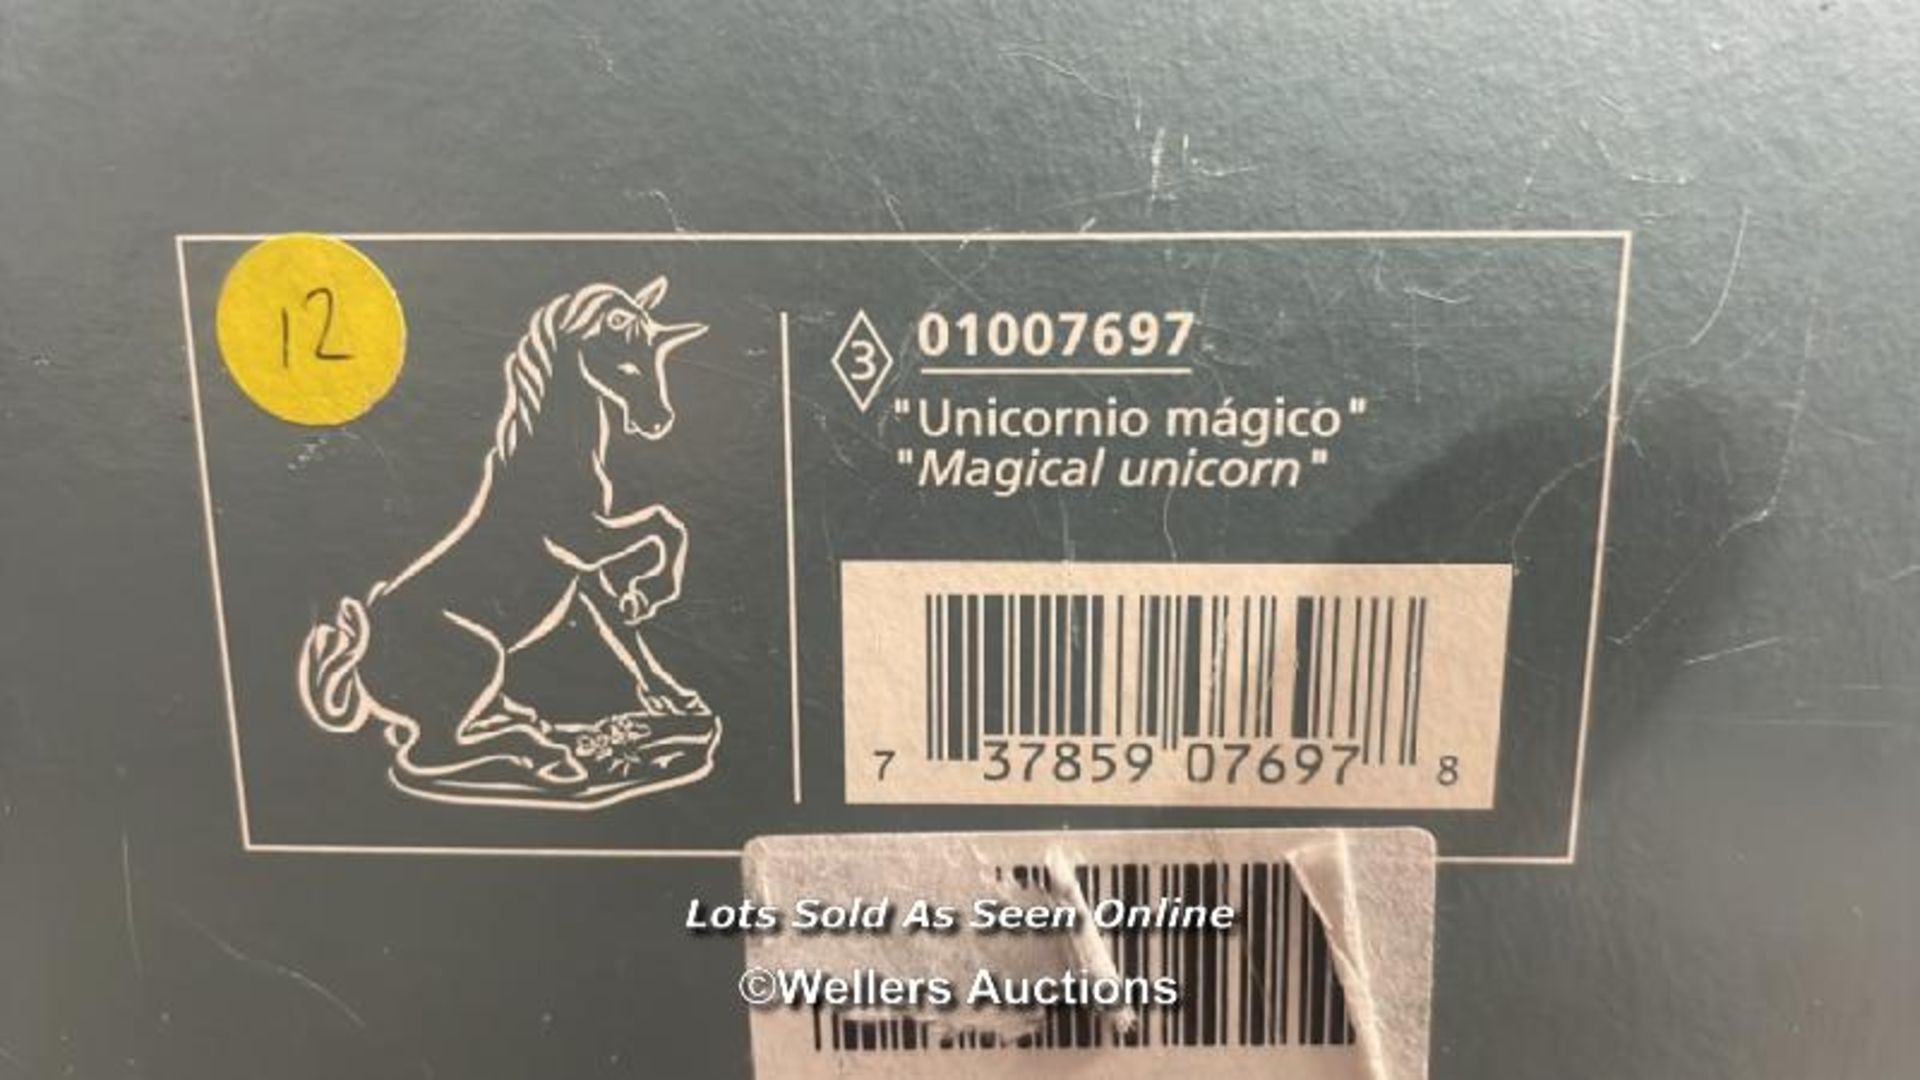 LLADRO PRIVILAGE COLLECTION "MAGICAL UNICORN" NO. 01007697, BOXED - Image 8 of 8